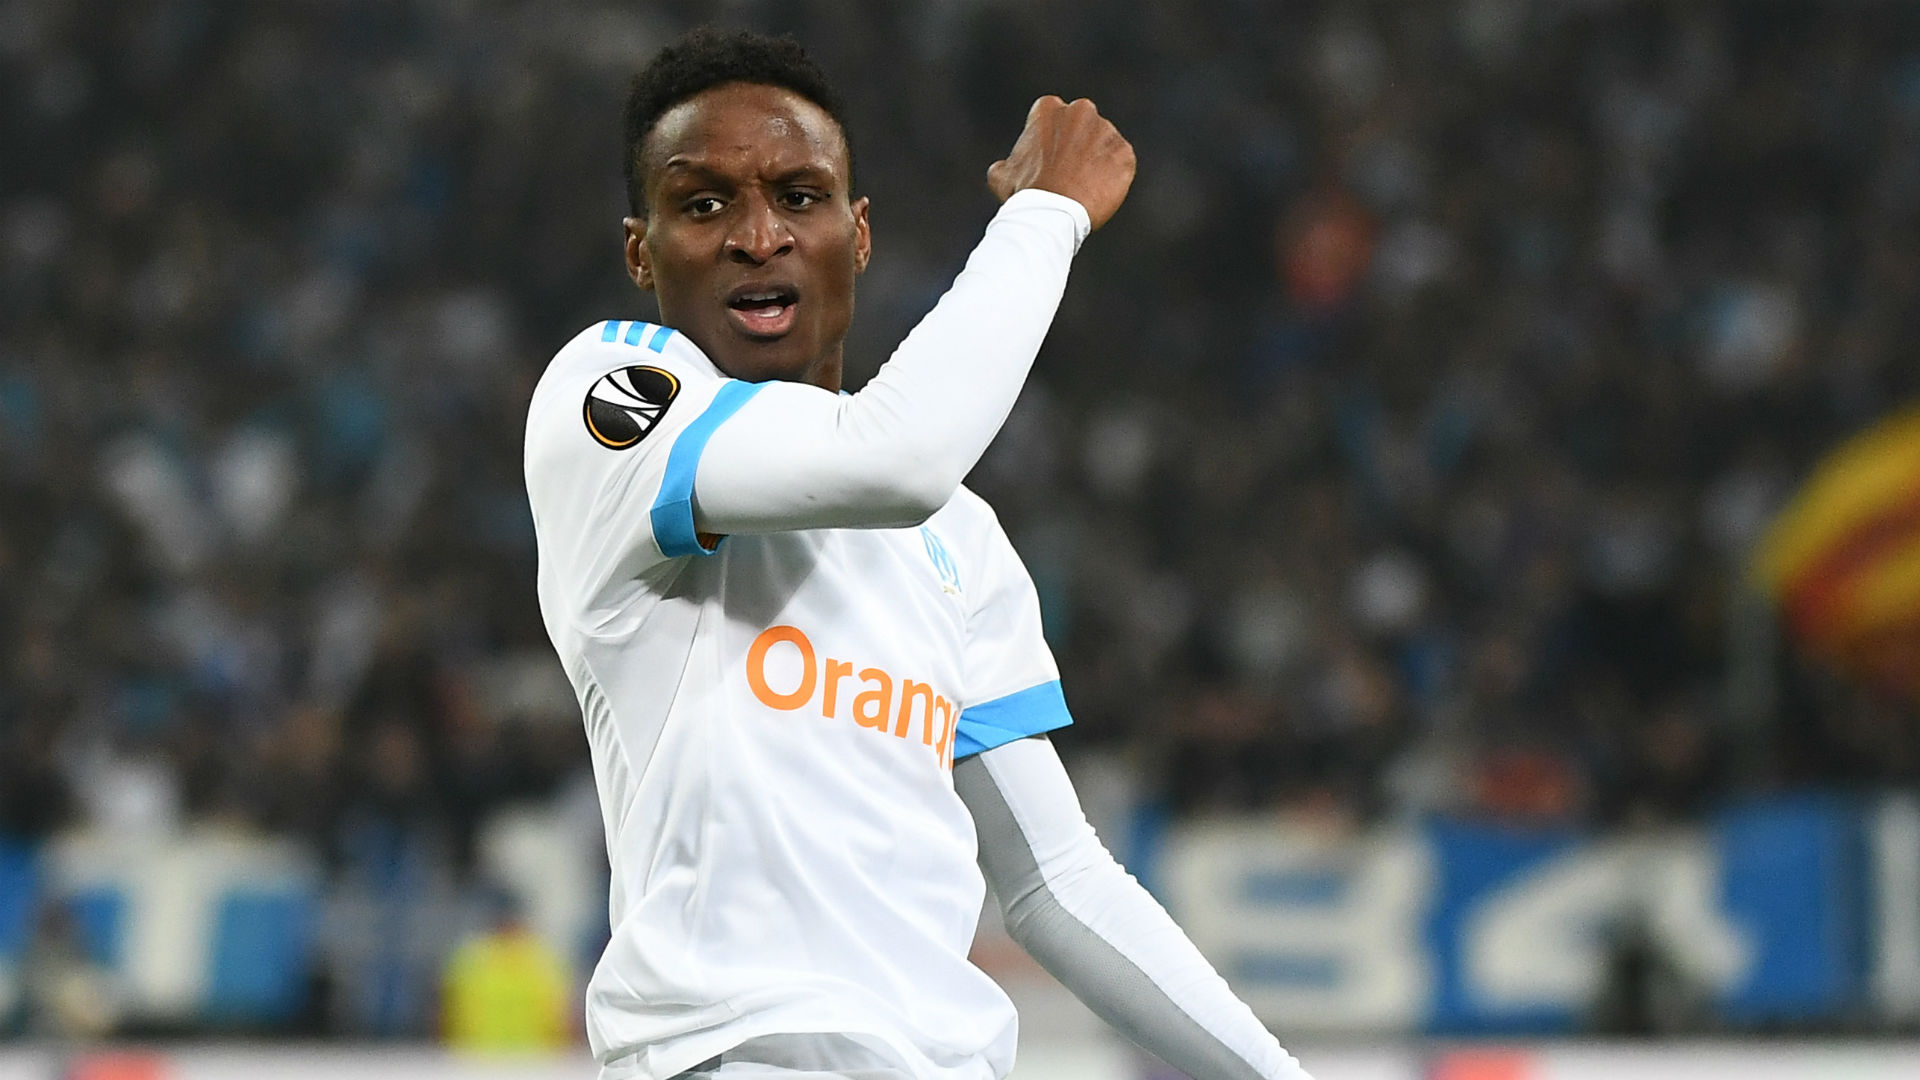 Bayern Munich sign €10m right-back Sarr from Marseille in deal until 2024